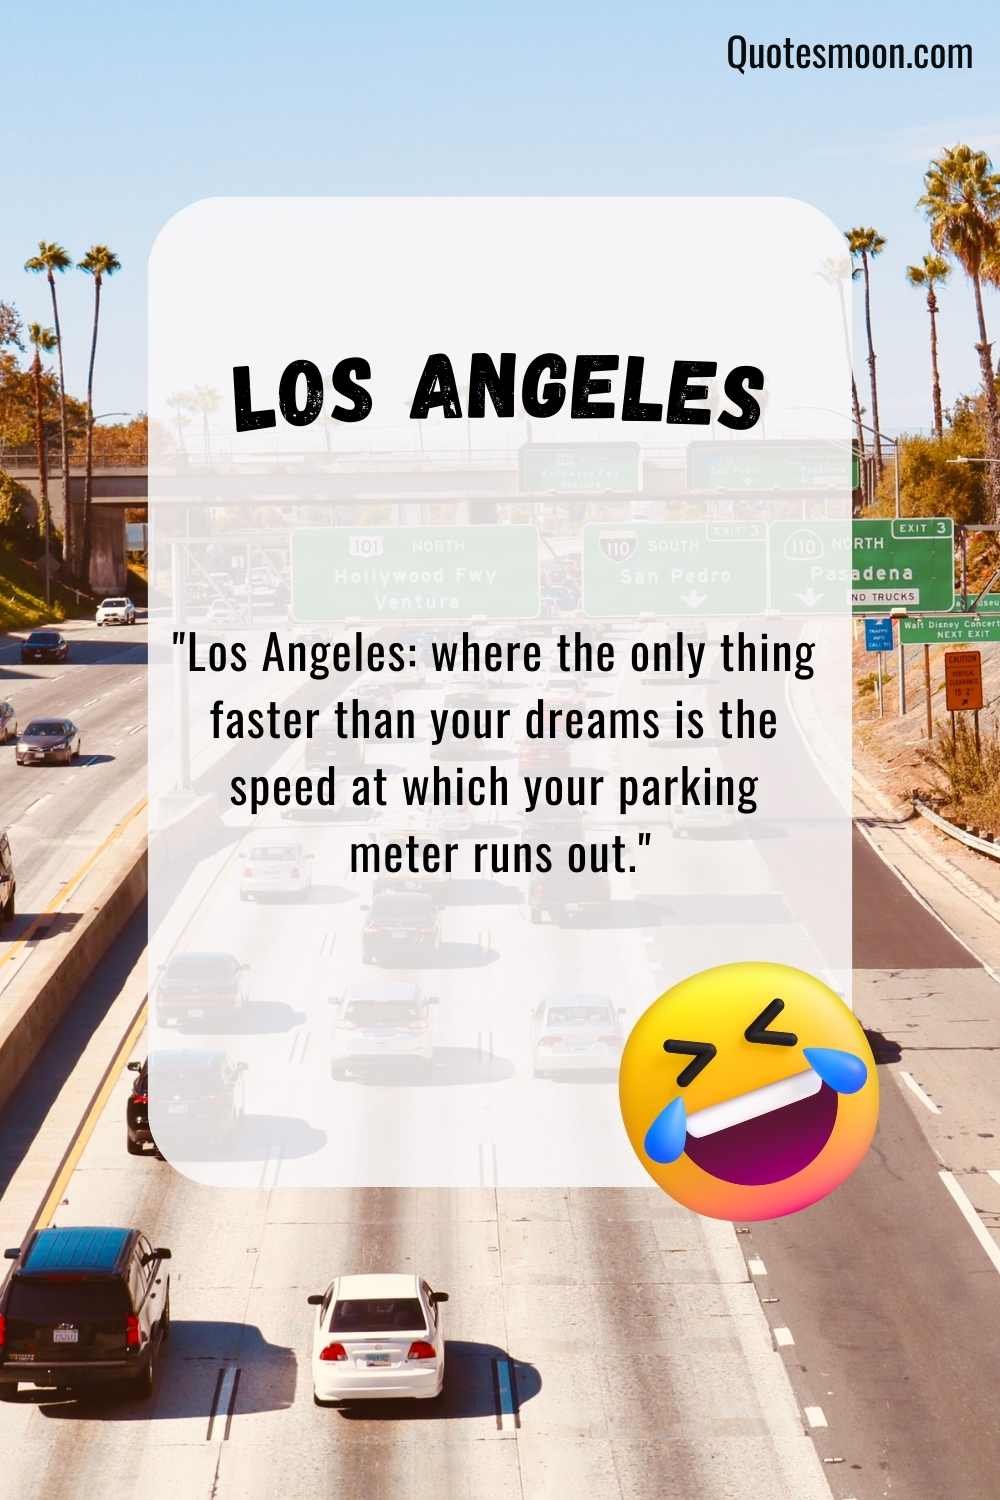 Los Angeles Quotes for Inspiring with pics HD